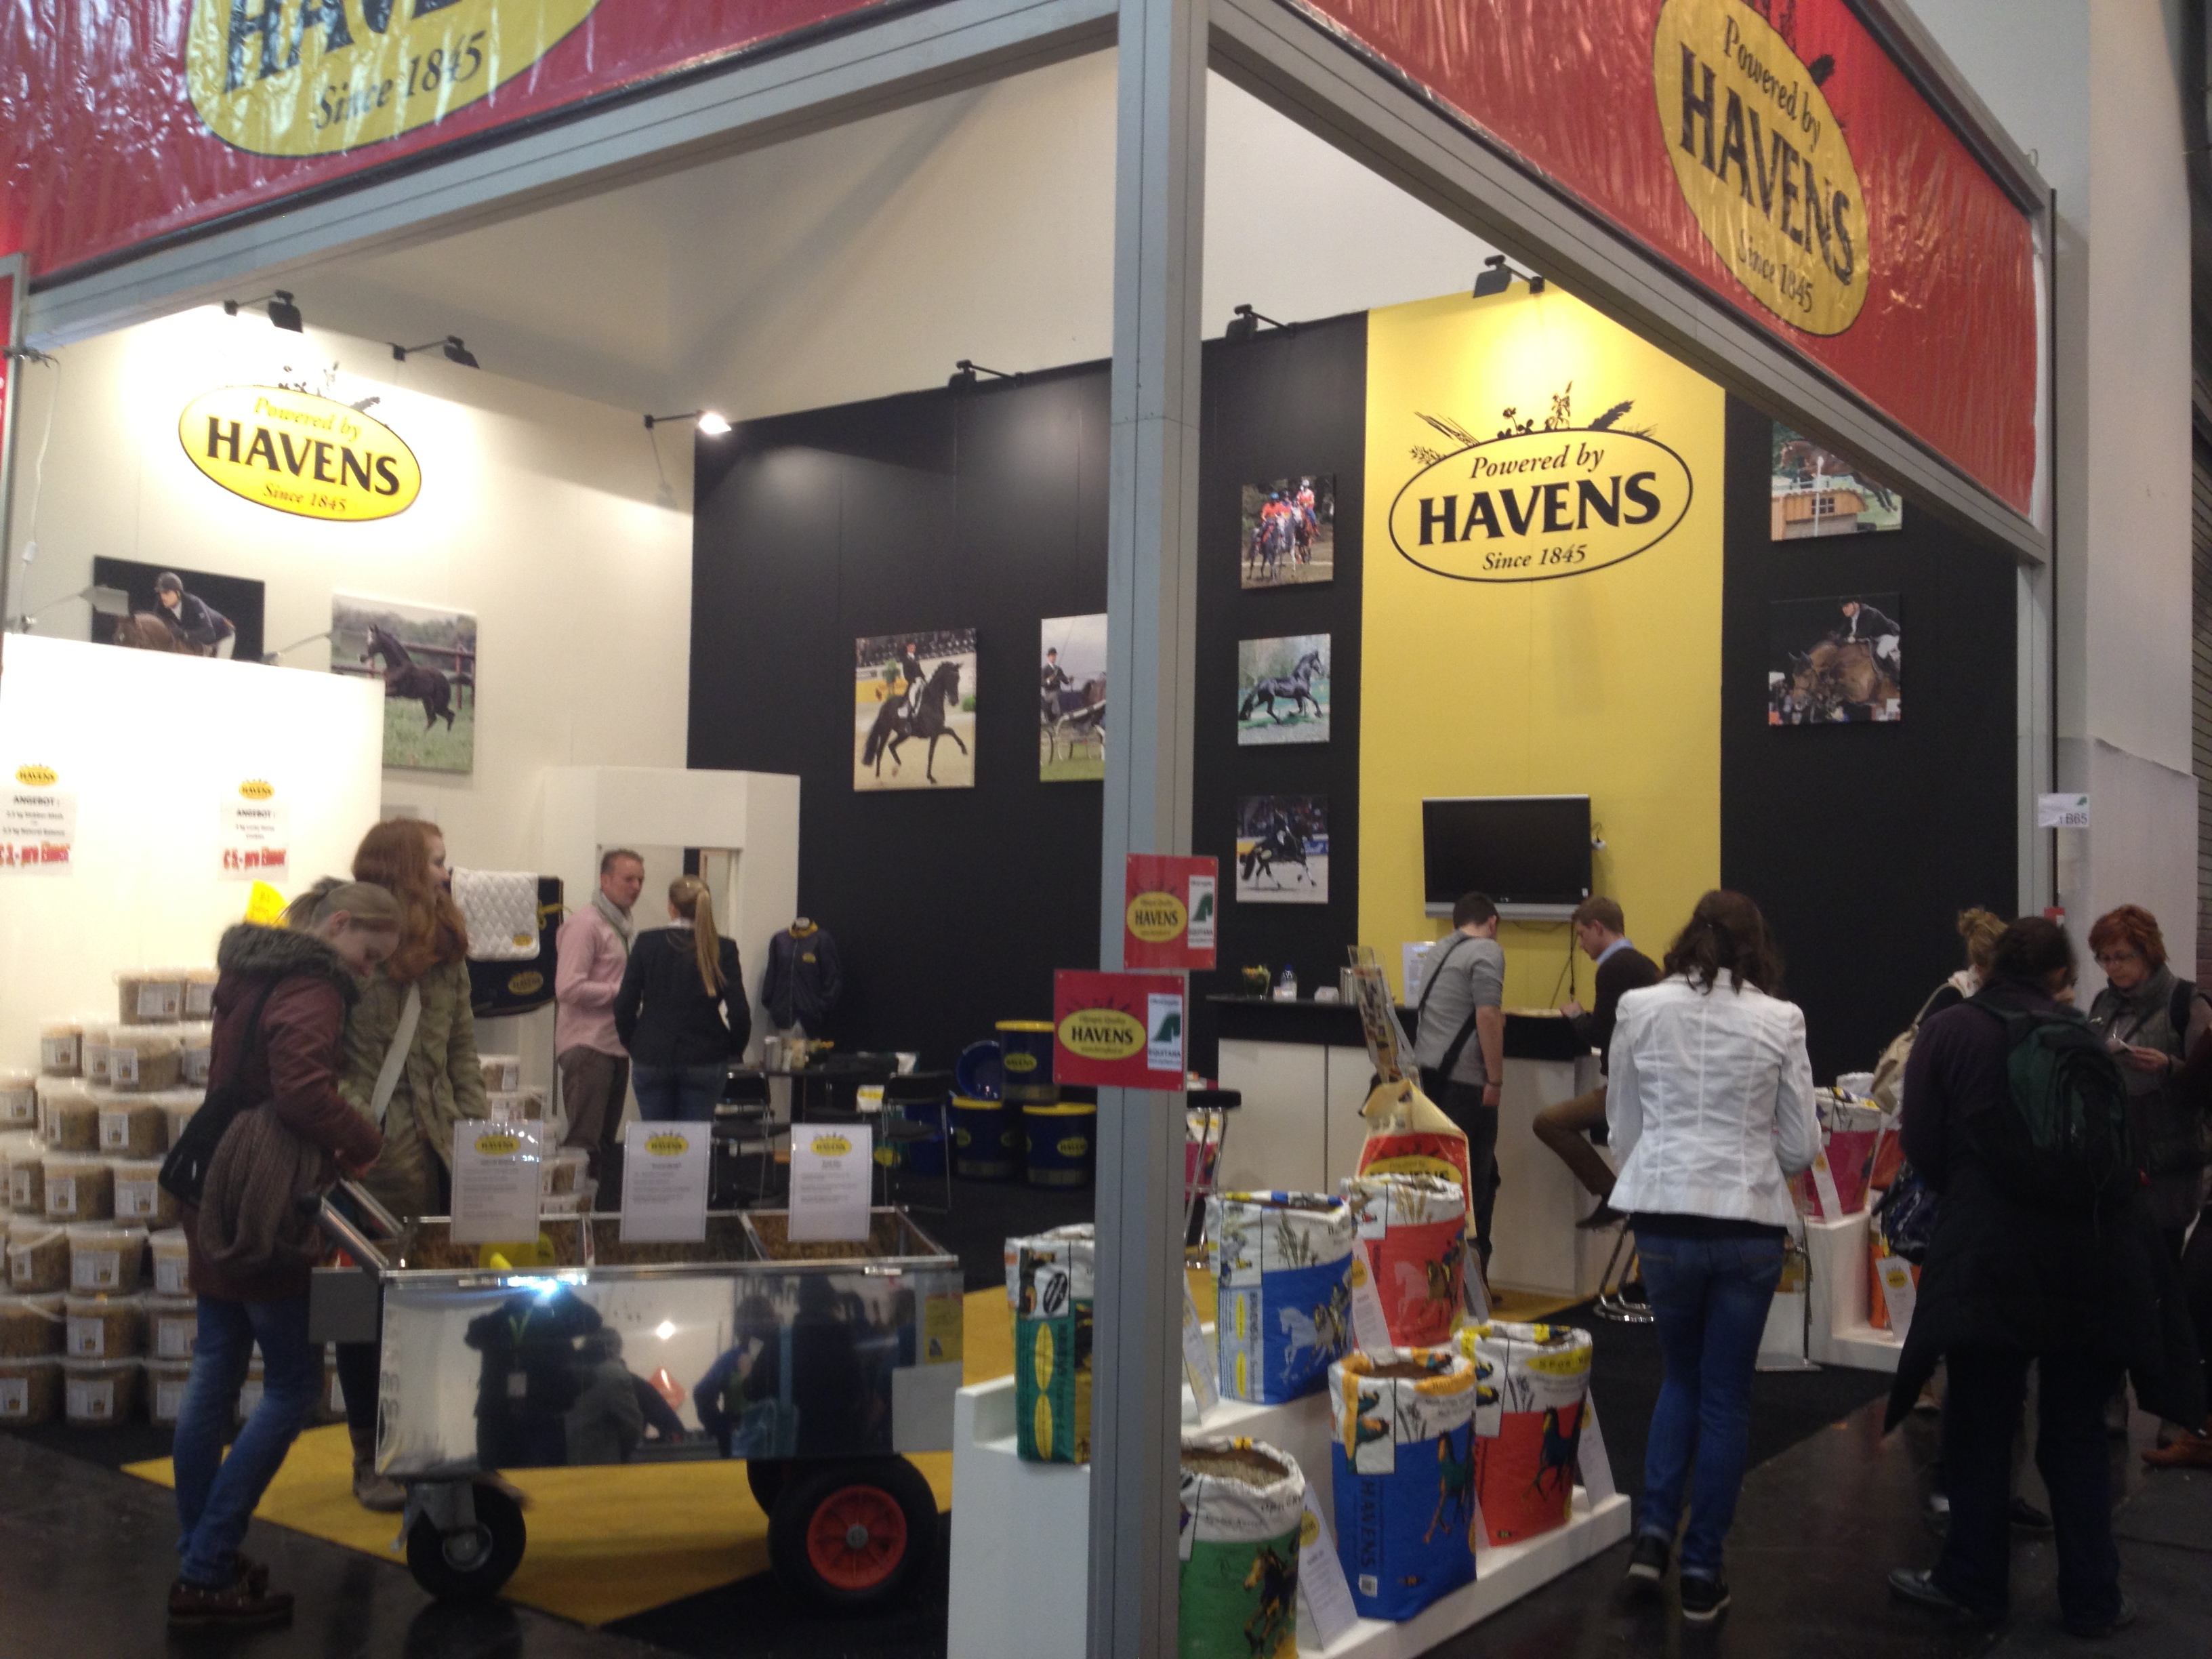 Havens - The official supplier - Equitana 2013